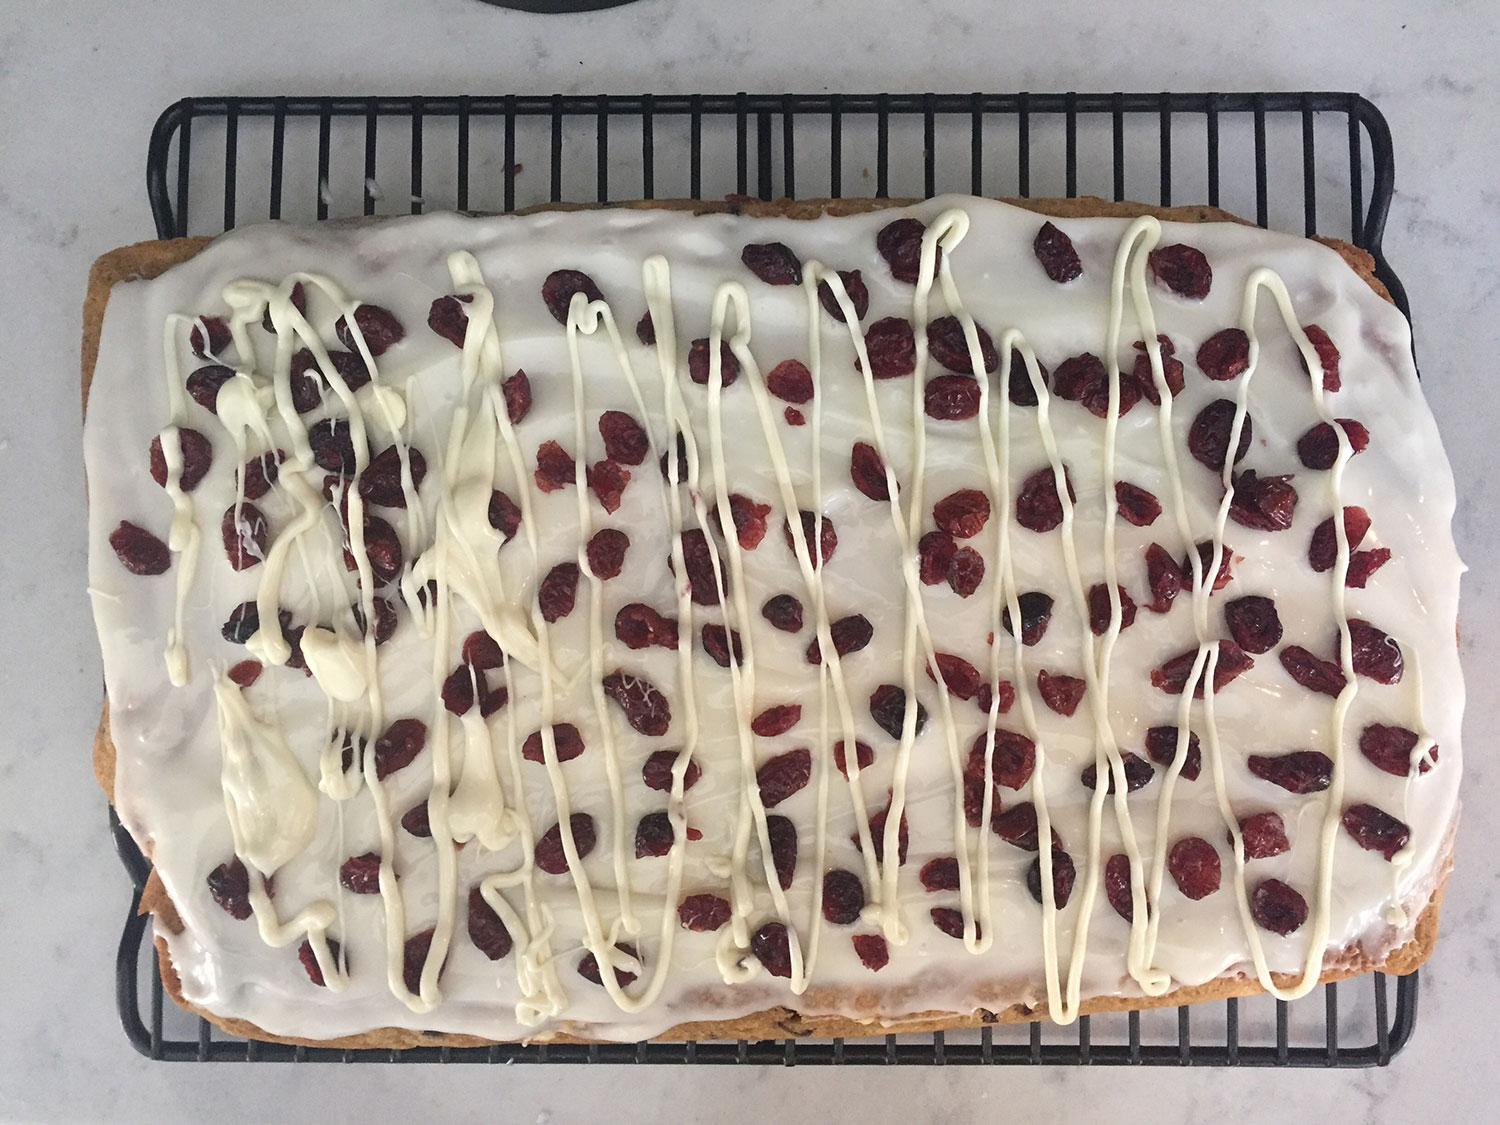 Starbucks Cranberry Bliss Bar Recipe Replica. Glamour and Gains by Eve